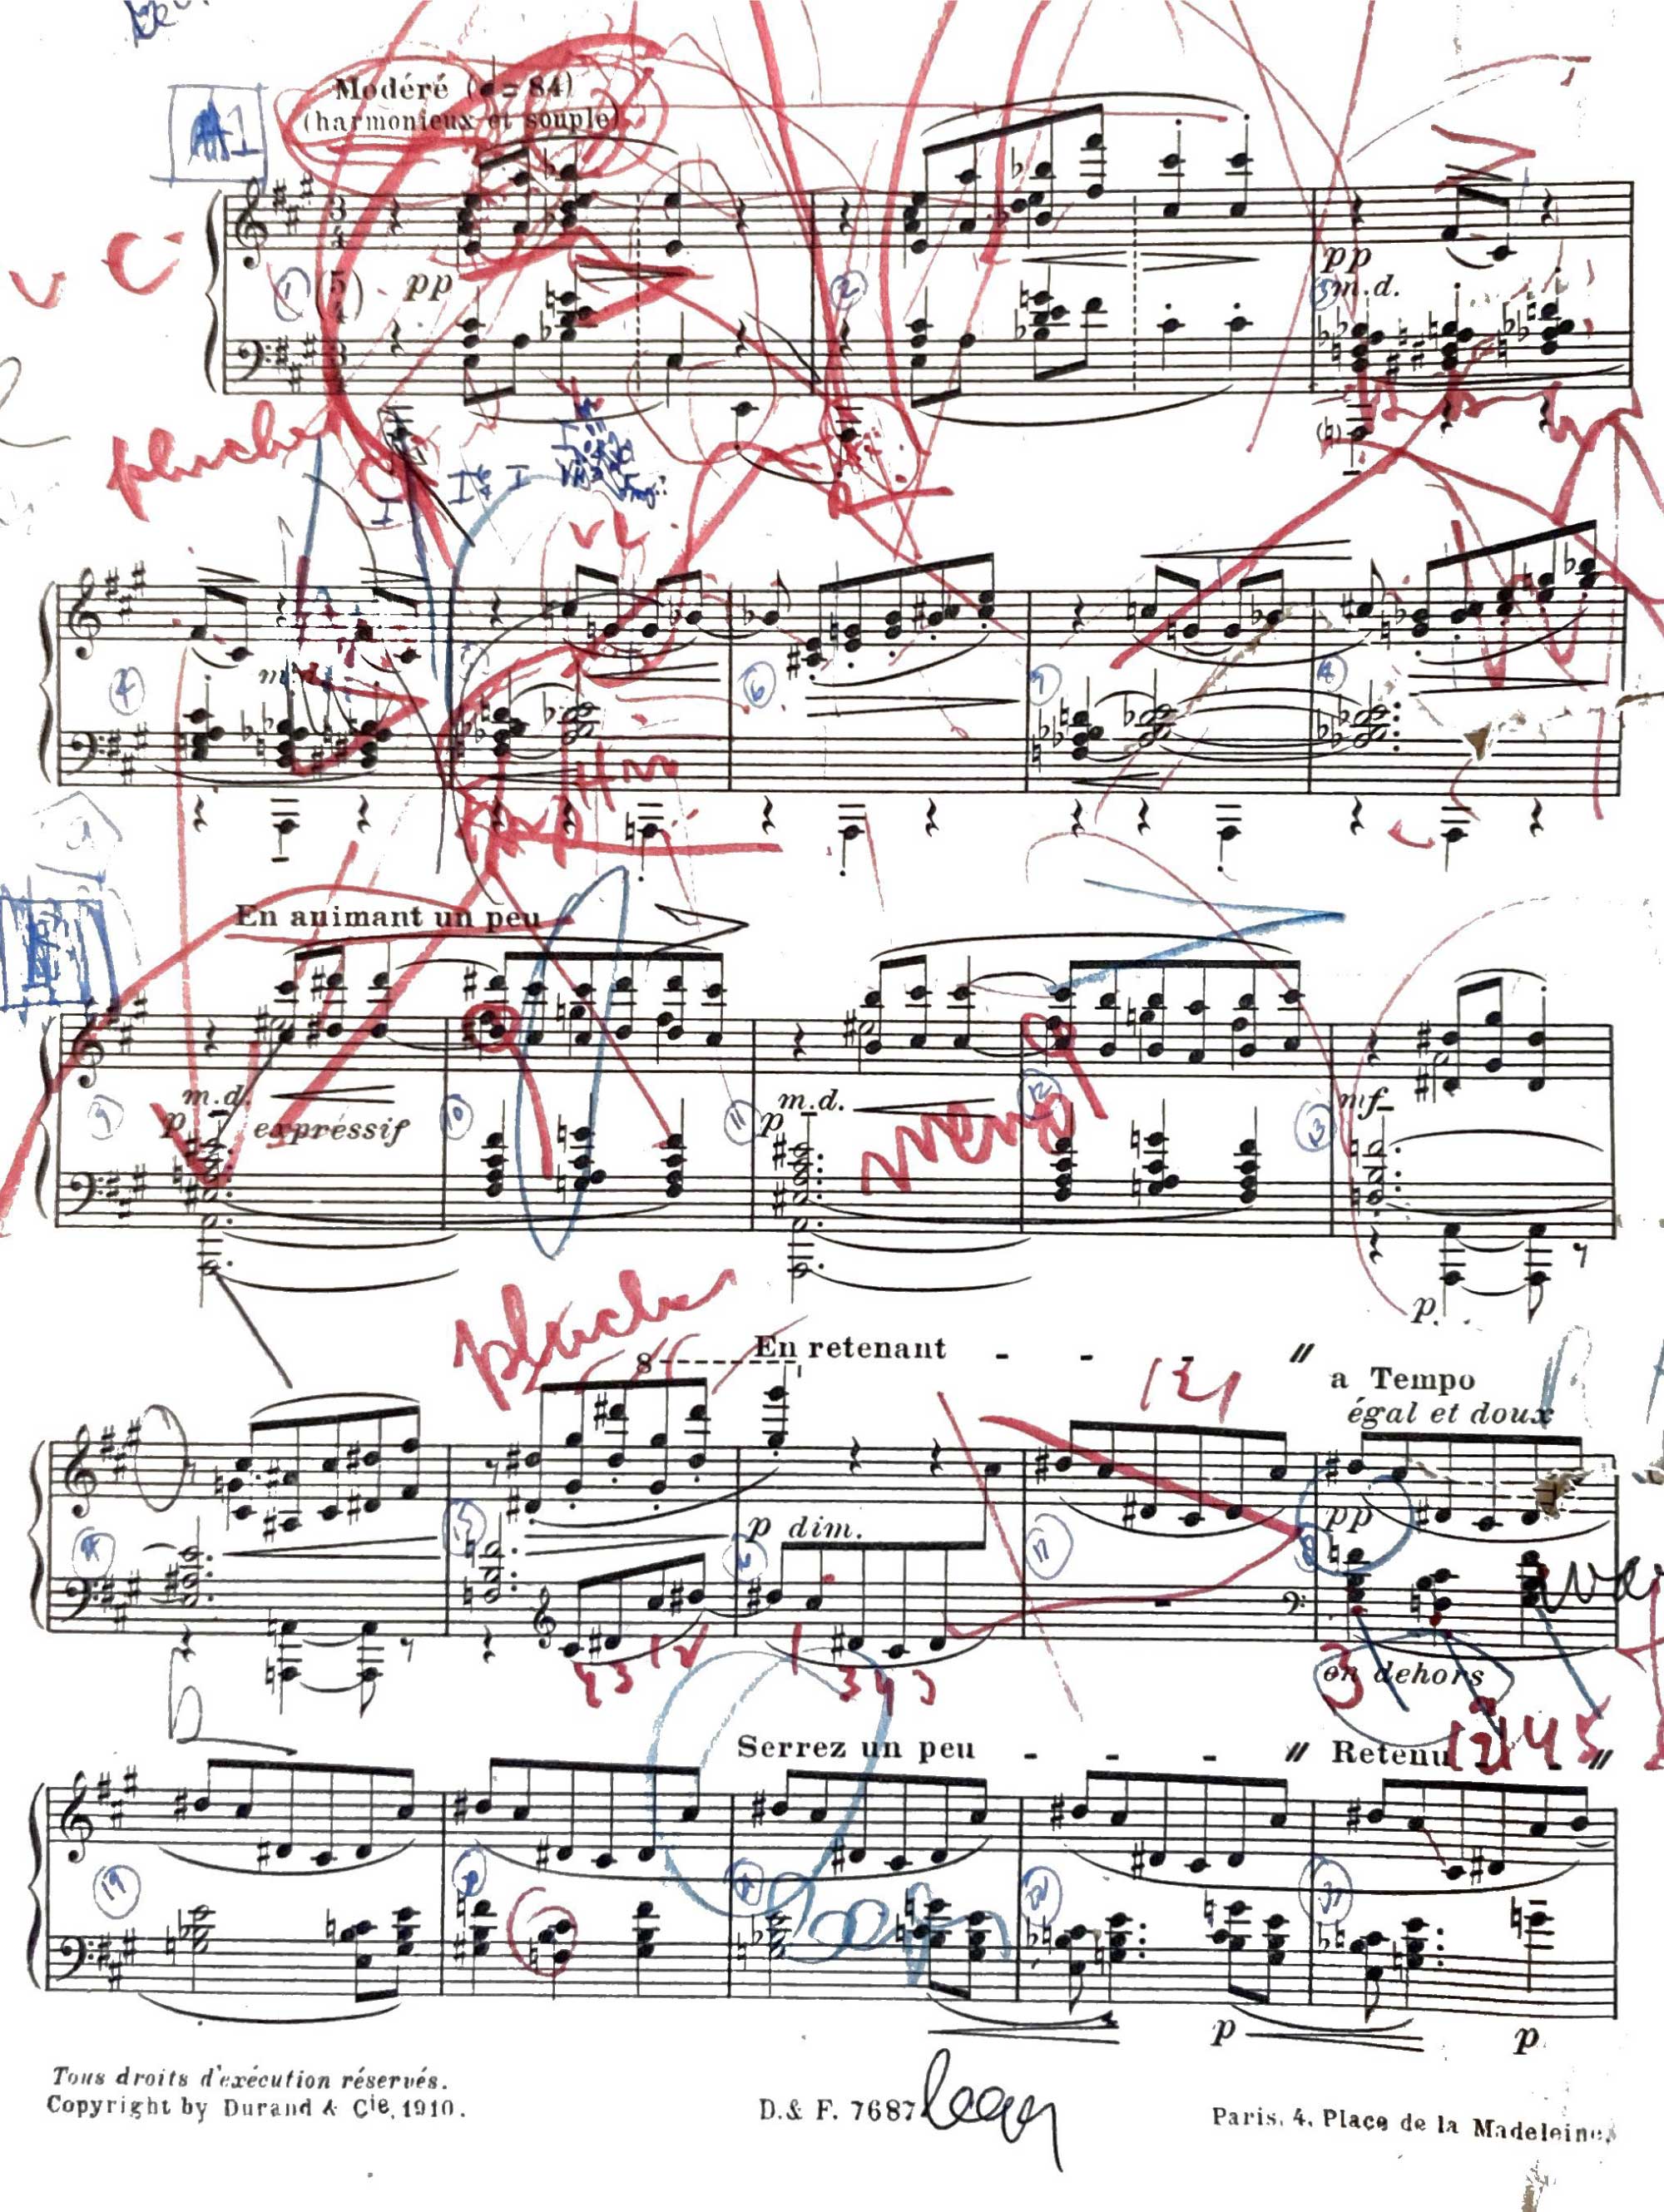 A page of music manuscript, a Chopin prelude, with instructional markings in various colors by Harold Zabrack.